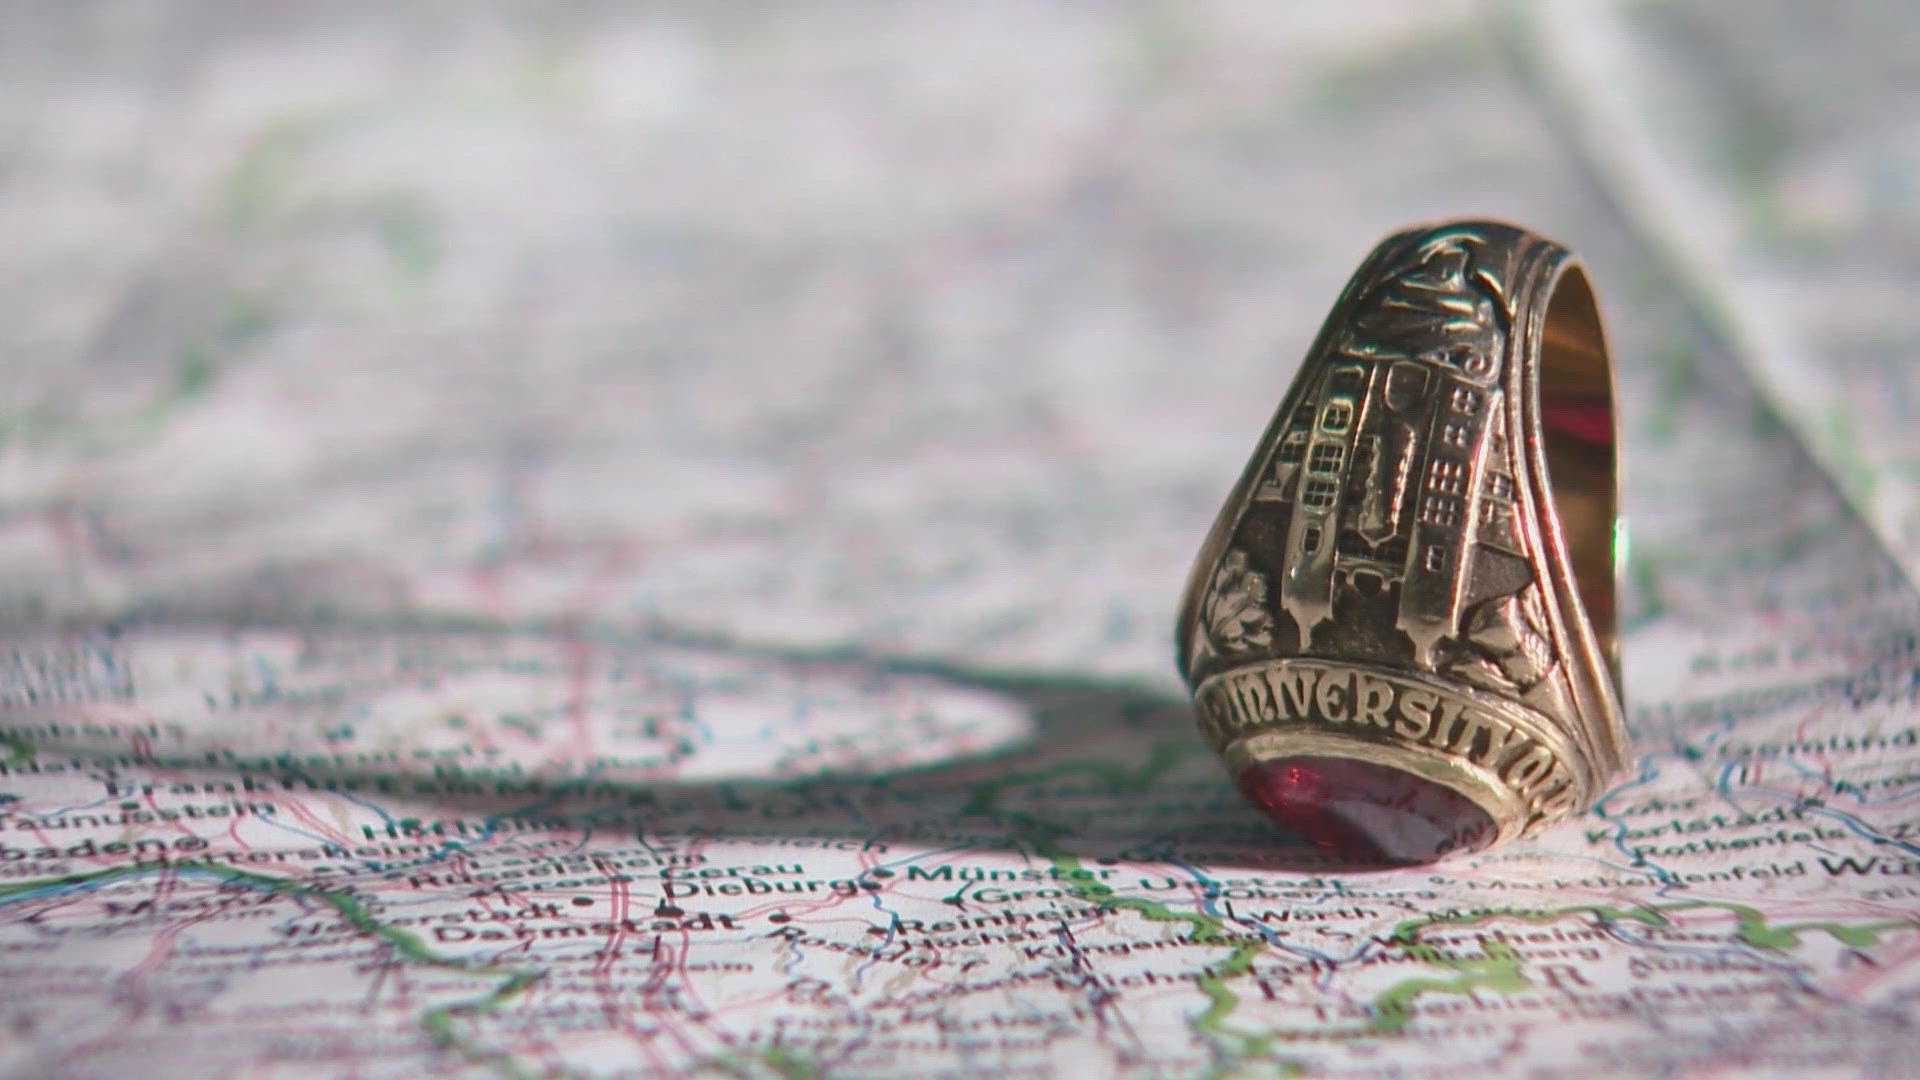 Ed Lee has been on a quest to find the owner of a class ring he found on German soil 62 years ago. Finally, the search is over.